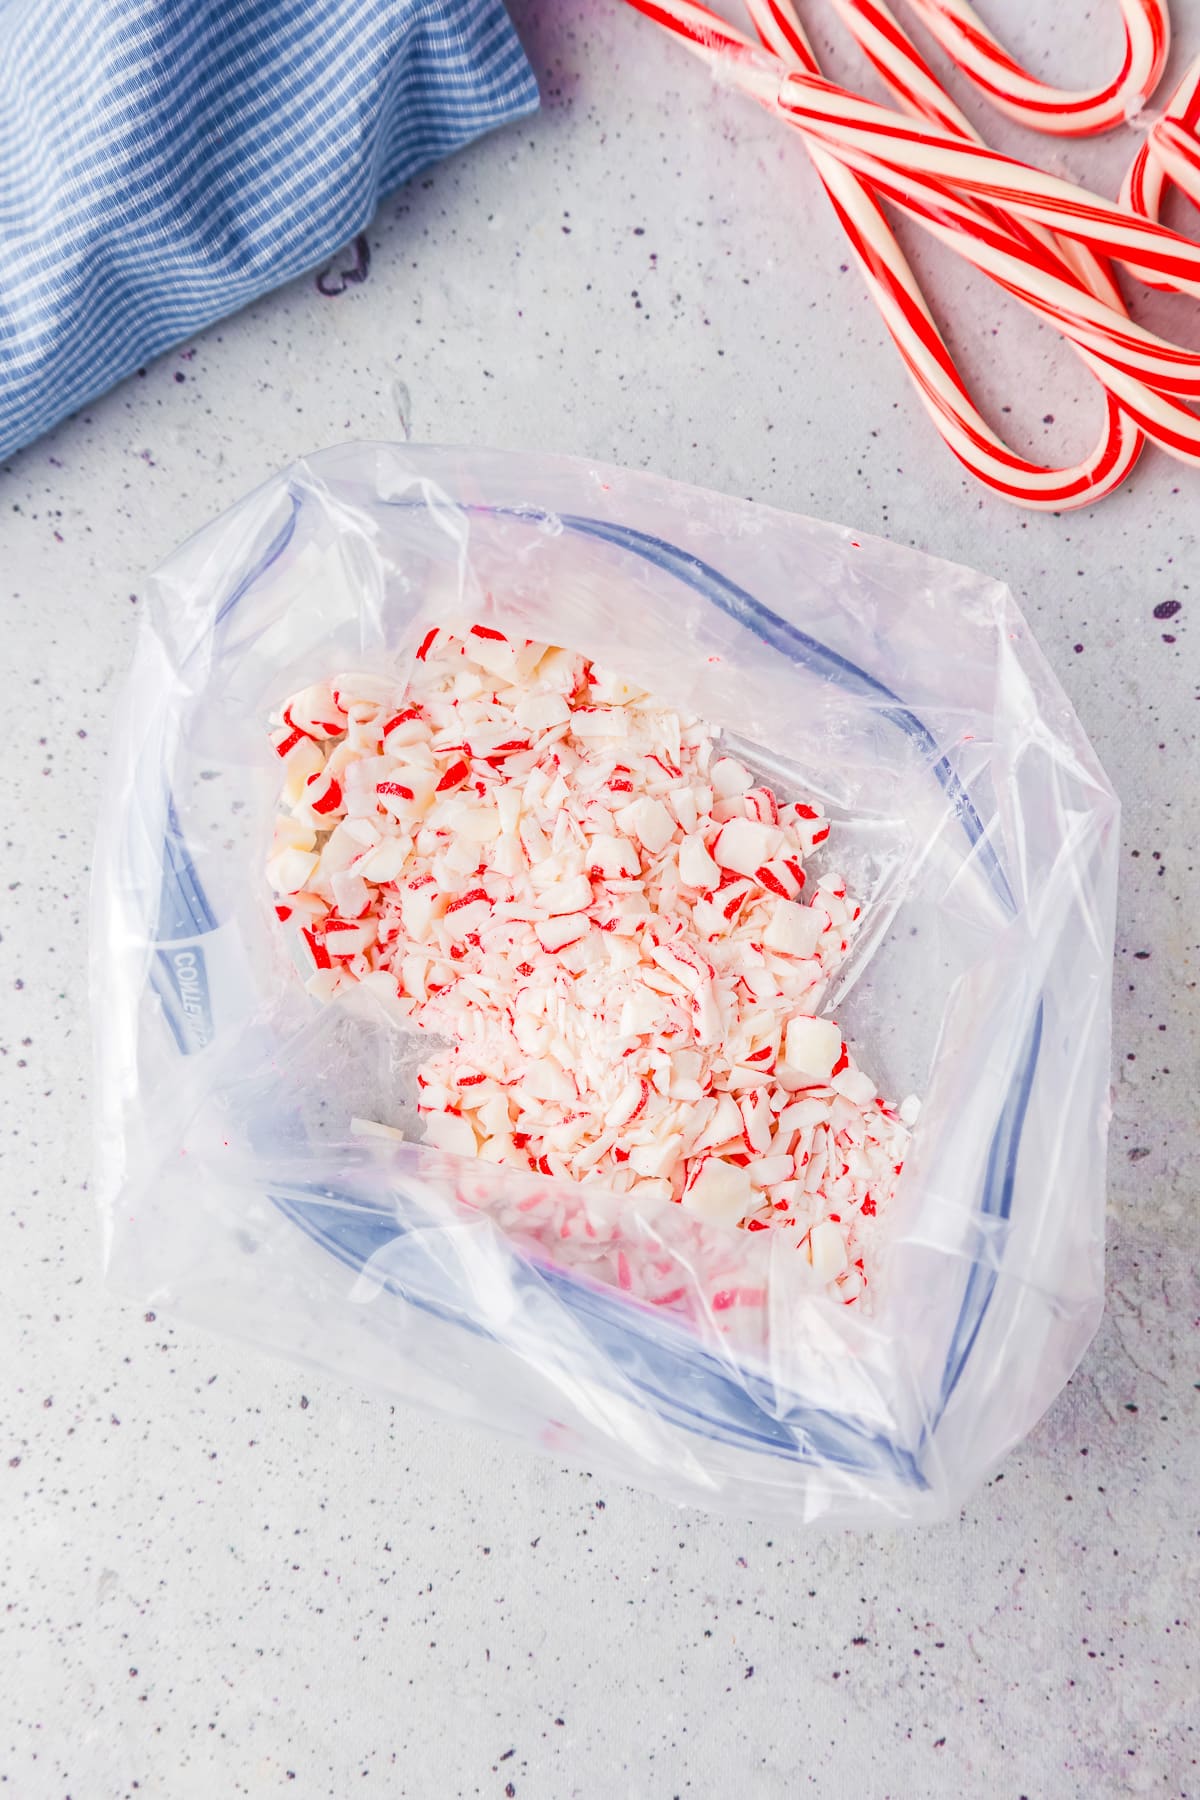 Candy canes in a plastic bag on a table next to candy canes on the table.